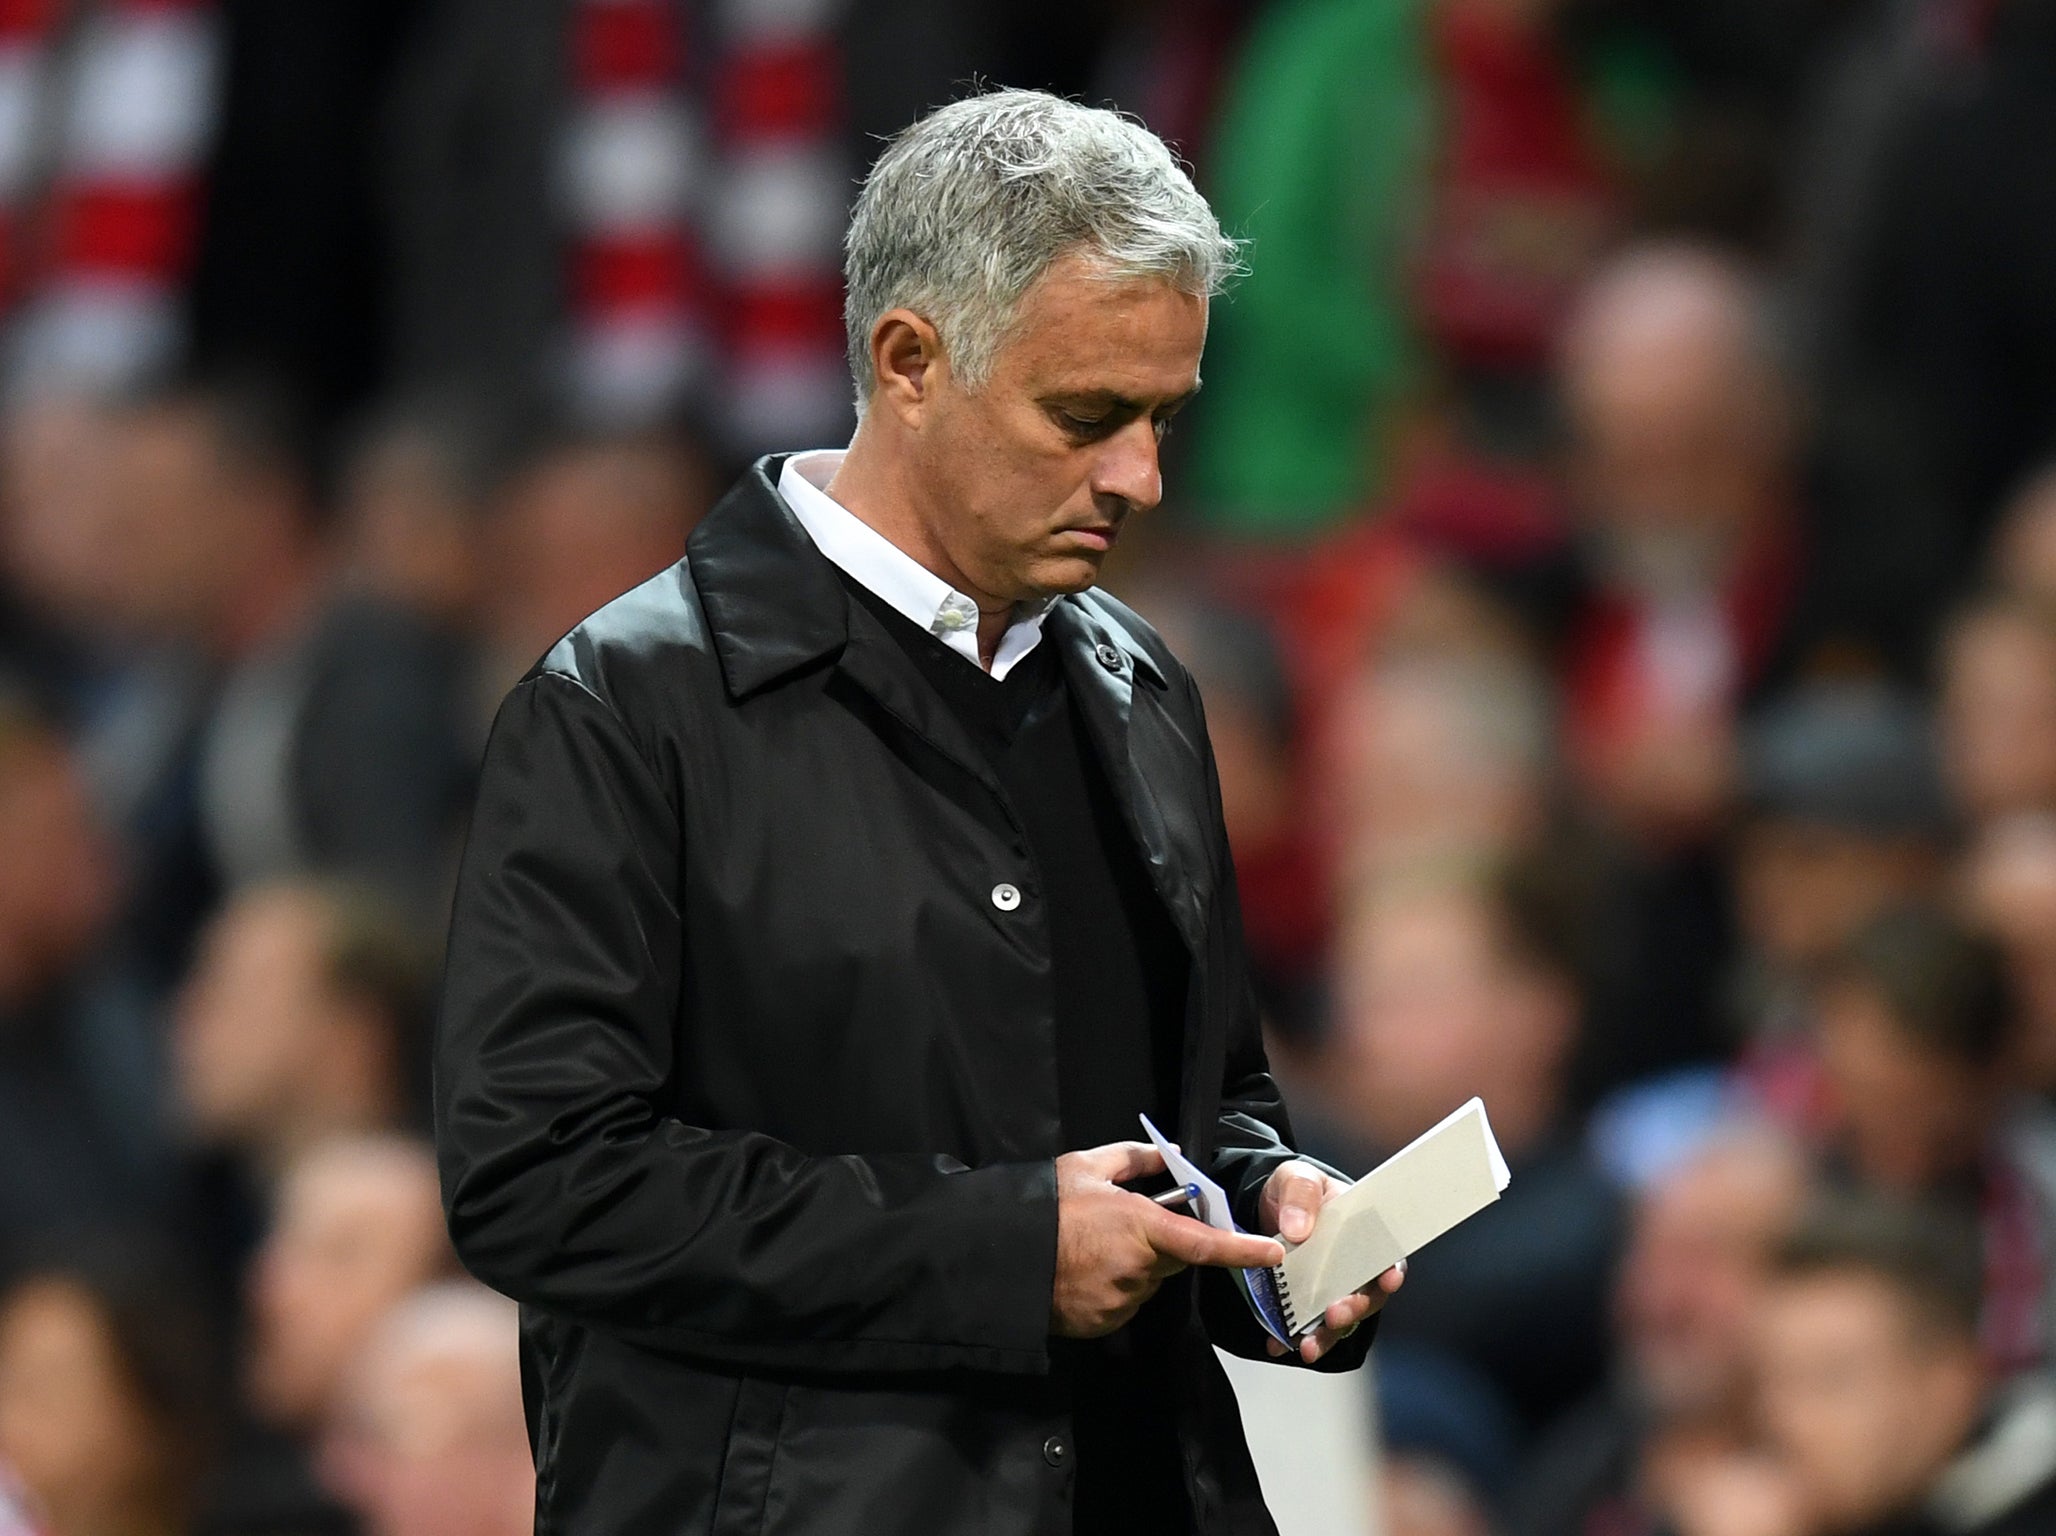 Mourinho must take a more easy-going approach with a squad he has been so hardline with